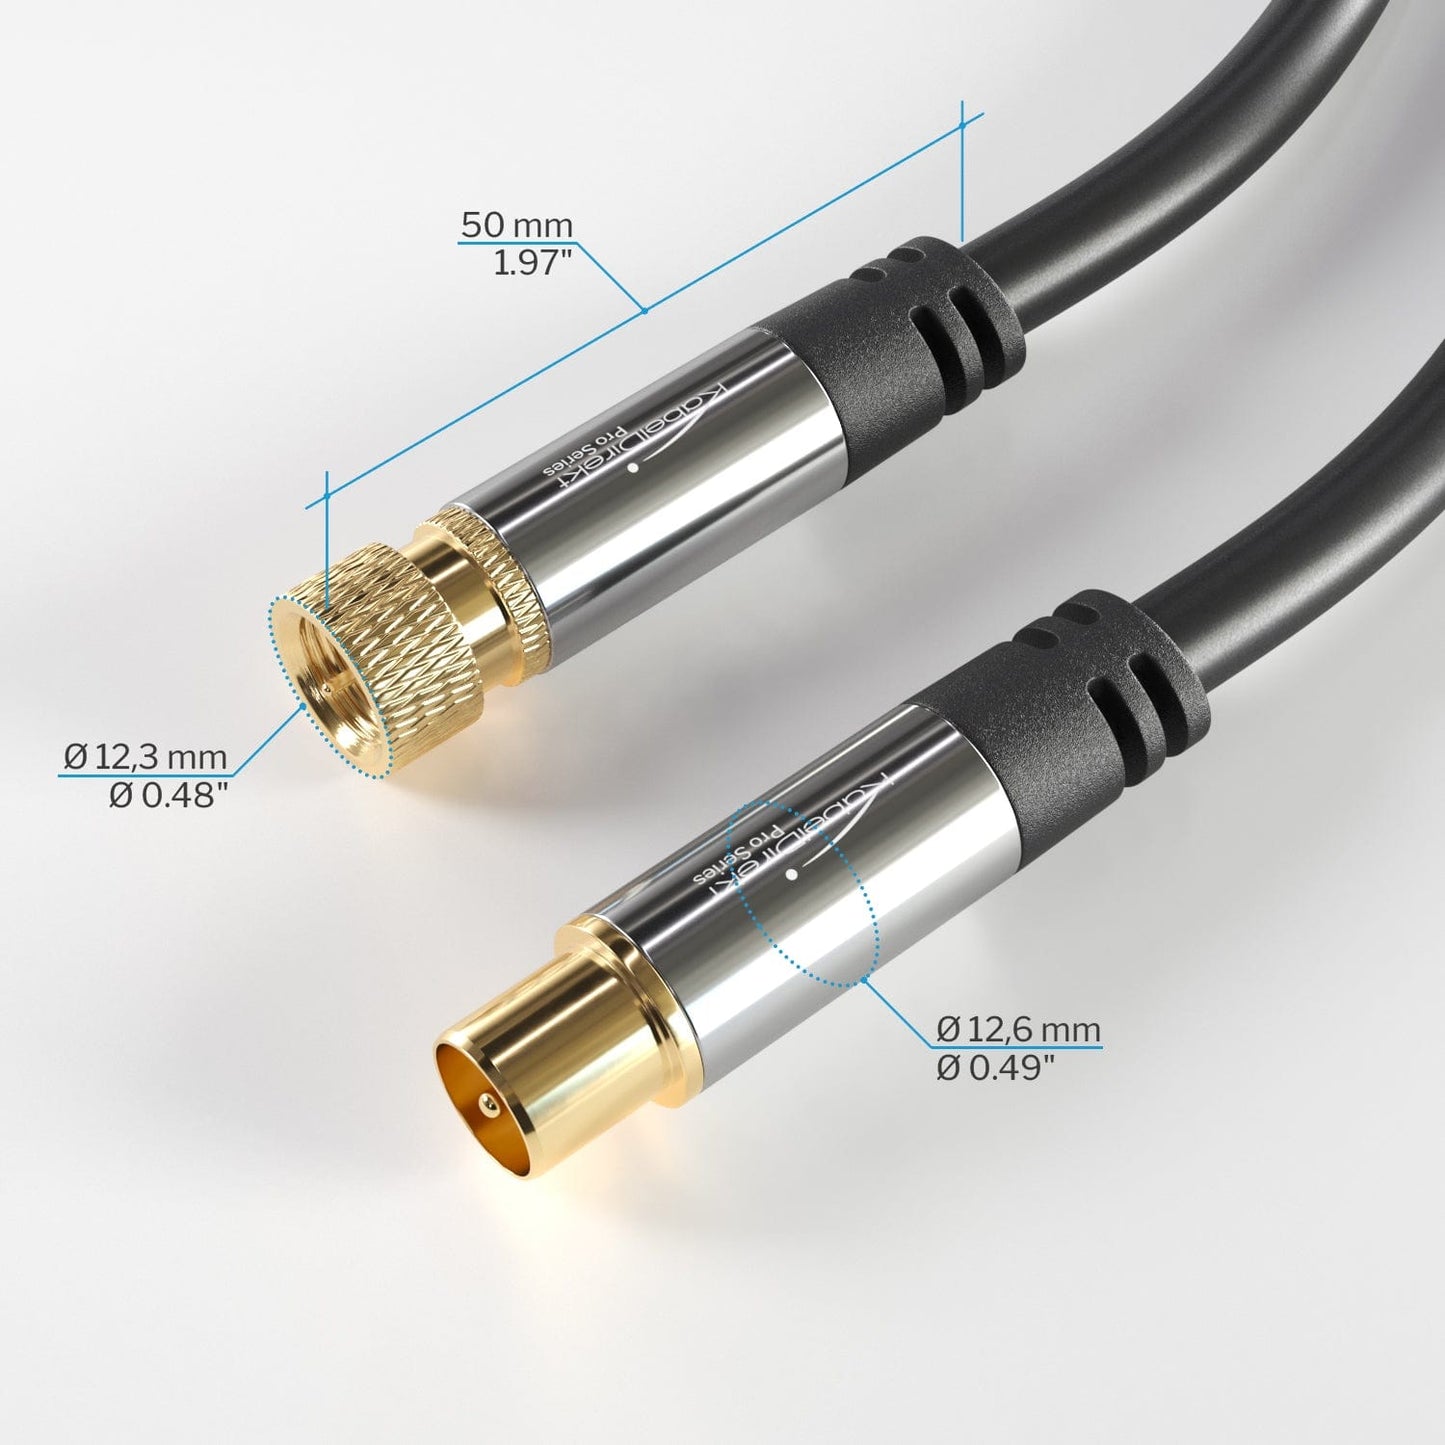 SAT/TV Cable - 75 Ohm - F-type connector, coax connector - coaxial cable for TV, HDTV, radio, DVB-T2, DVB-C, DVB-S 